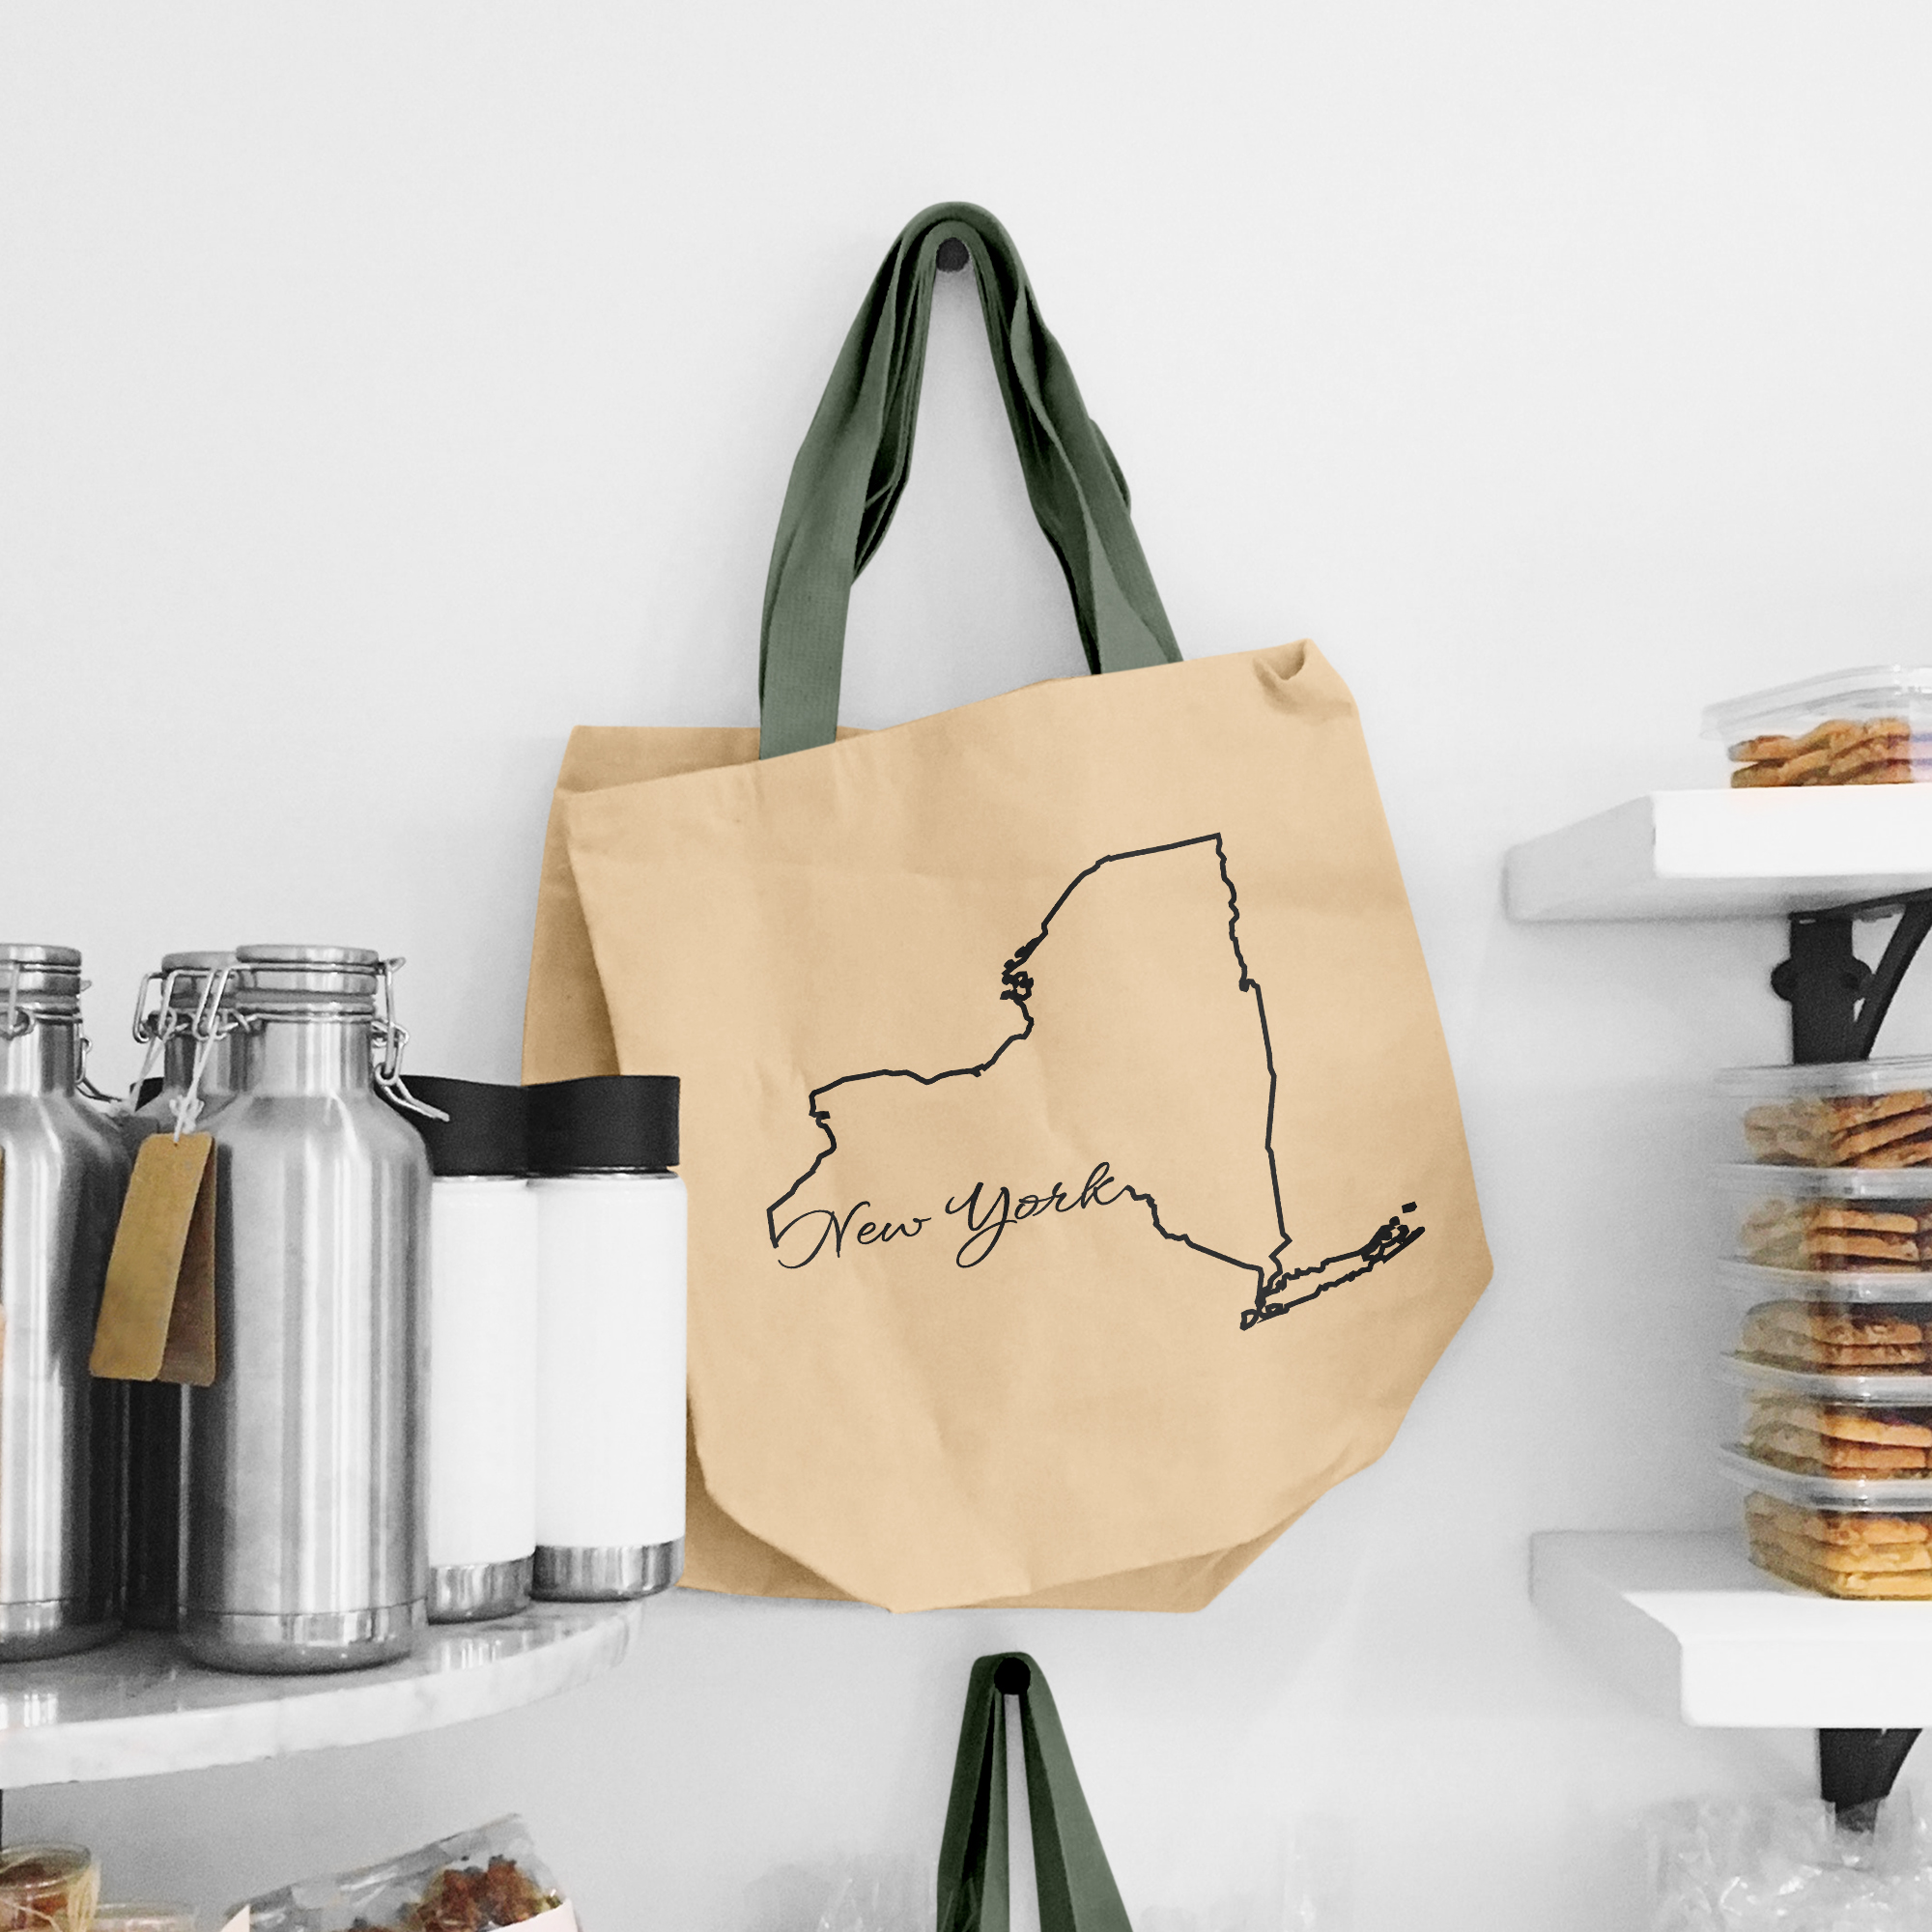 Black illustration of map of New York on the beige shopping bag with dirty green handle.